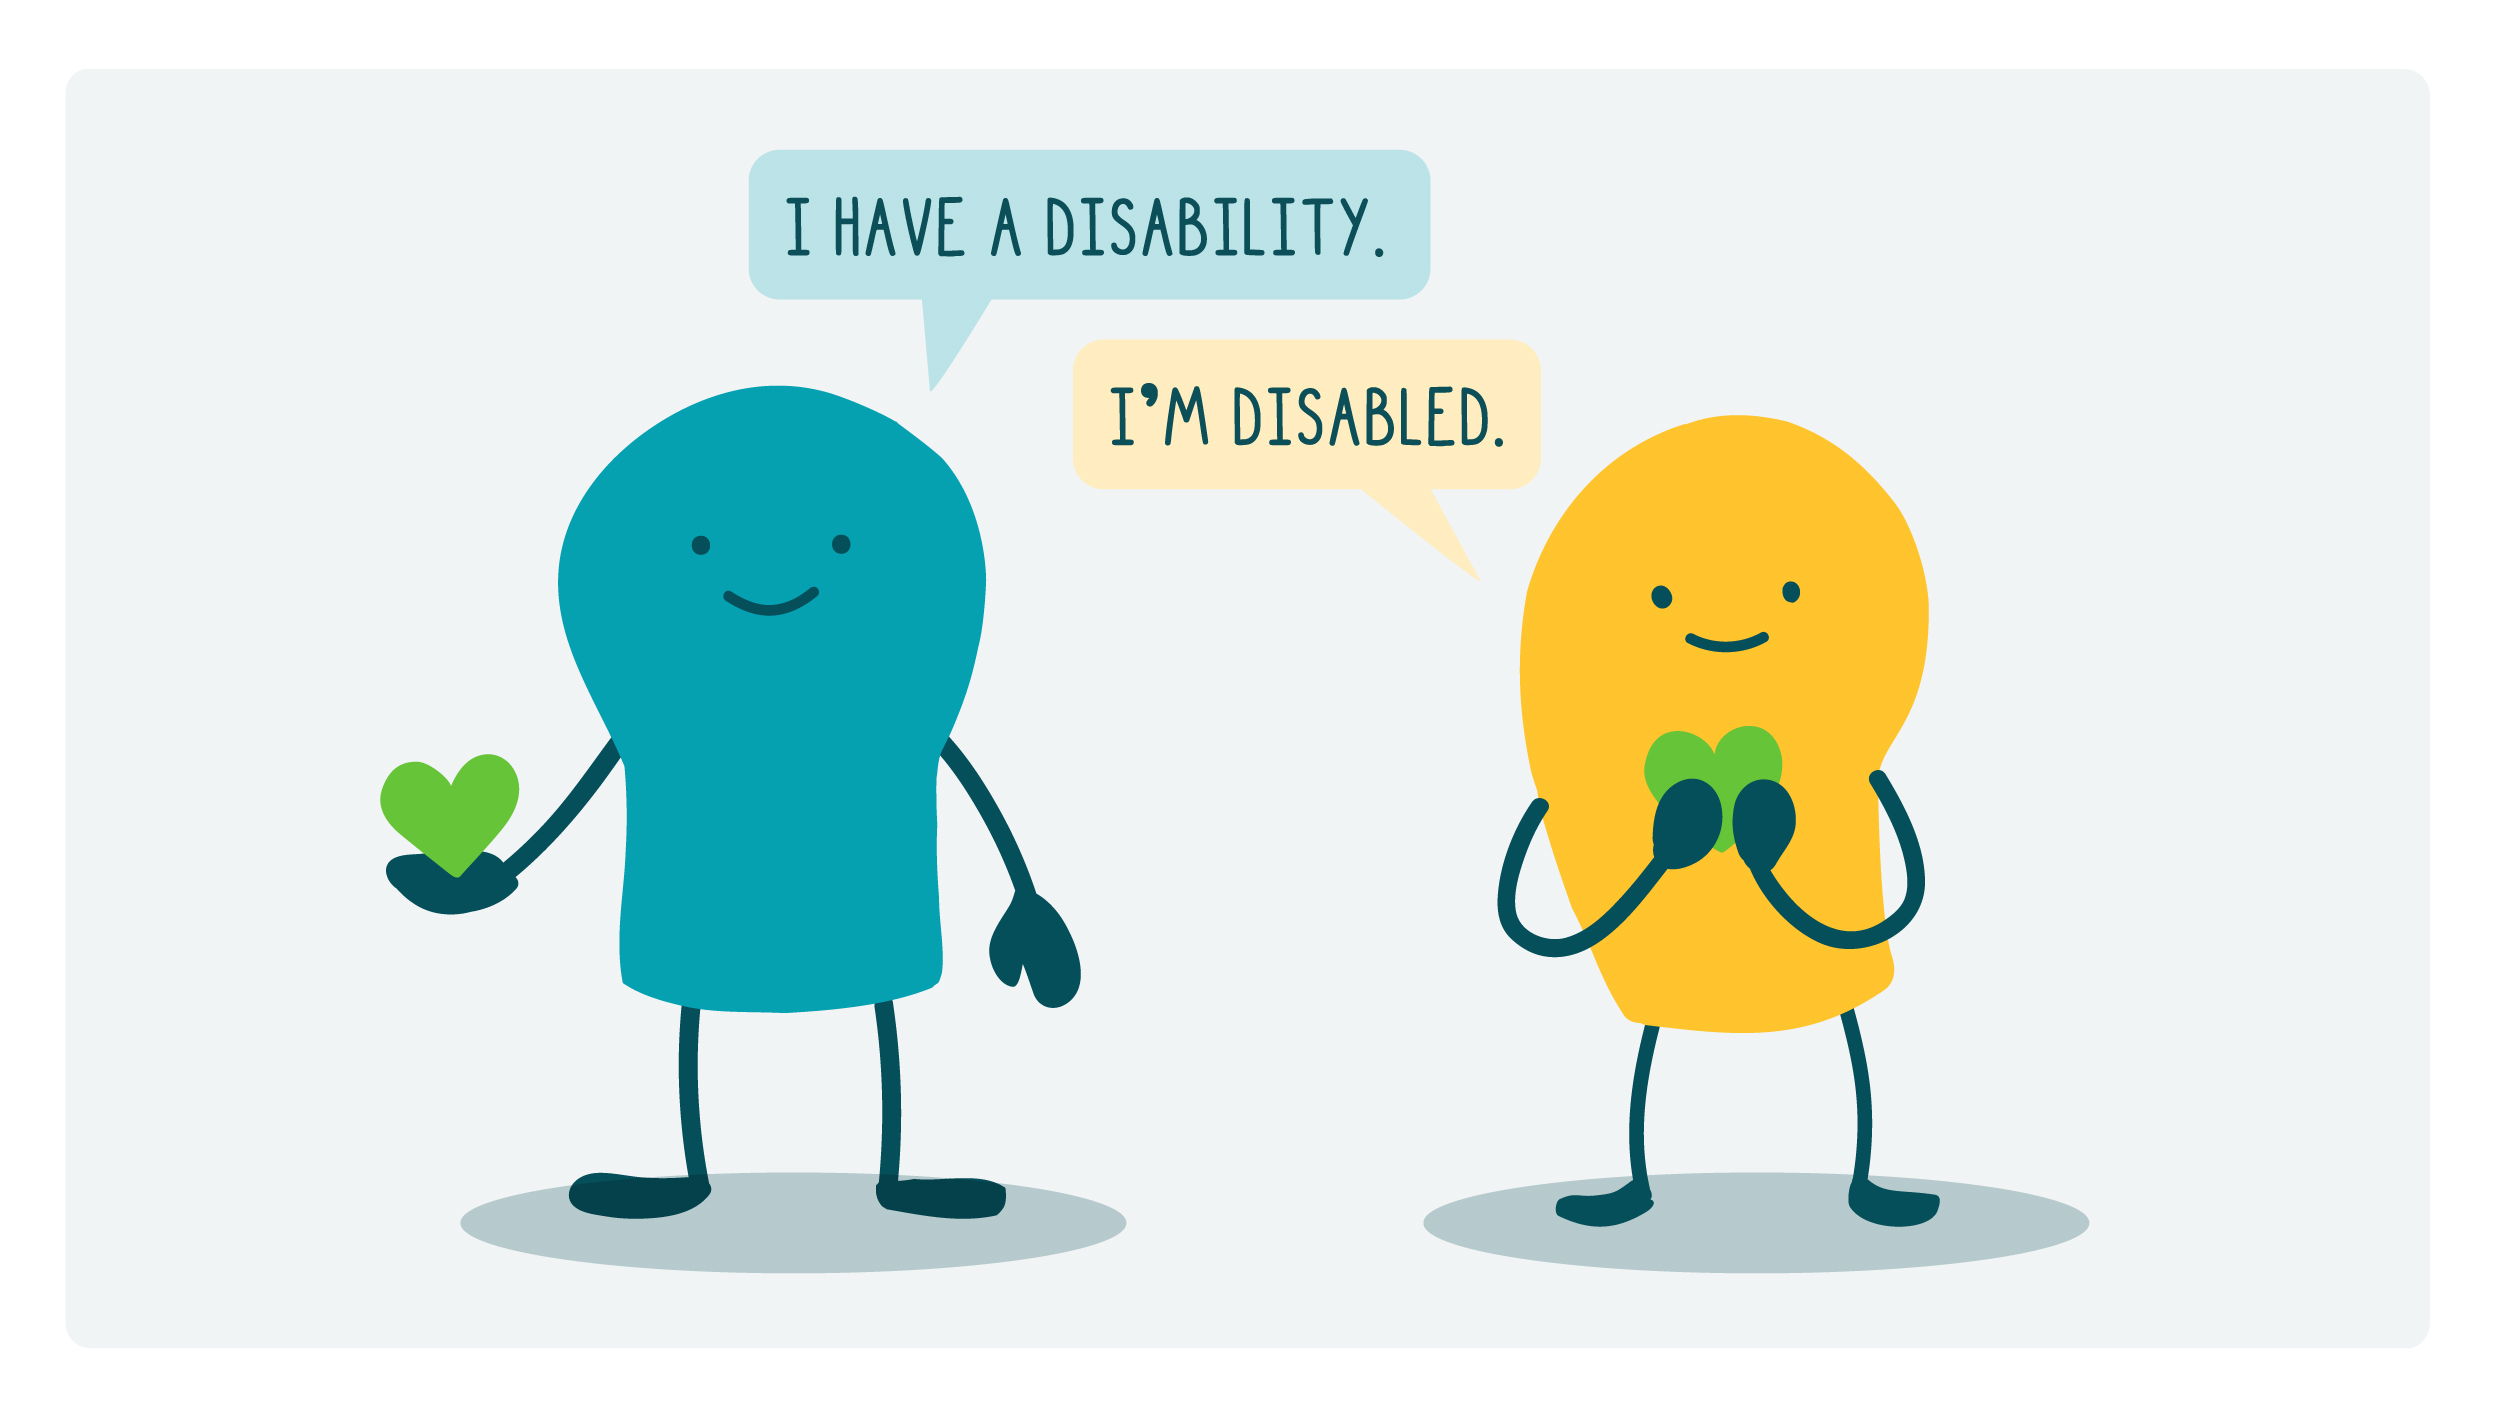 2 doodles stand side by side. One holds a heart in their outstretched hand, saying, “I have a disability.” The other holds a heart close to their chest, saying, “I’m disabled.”